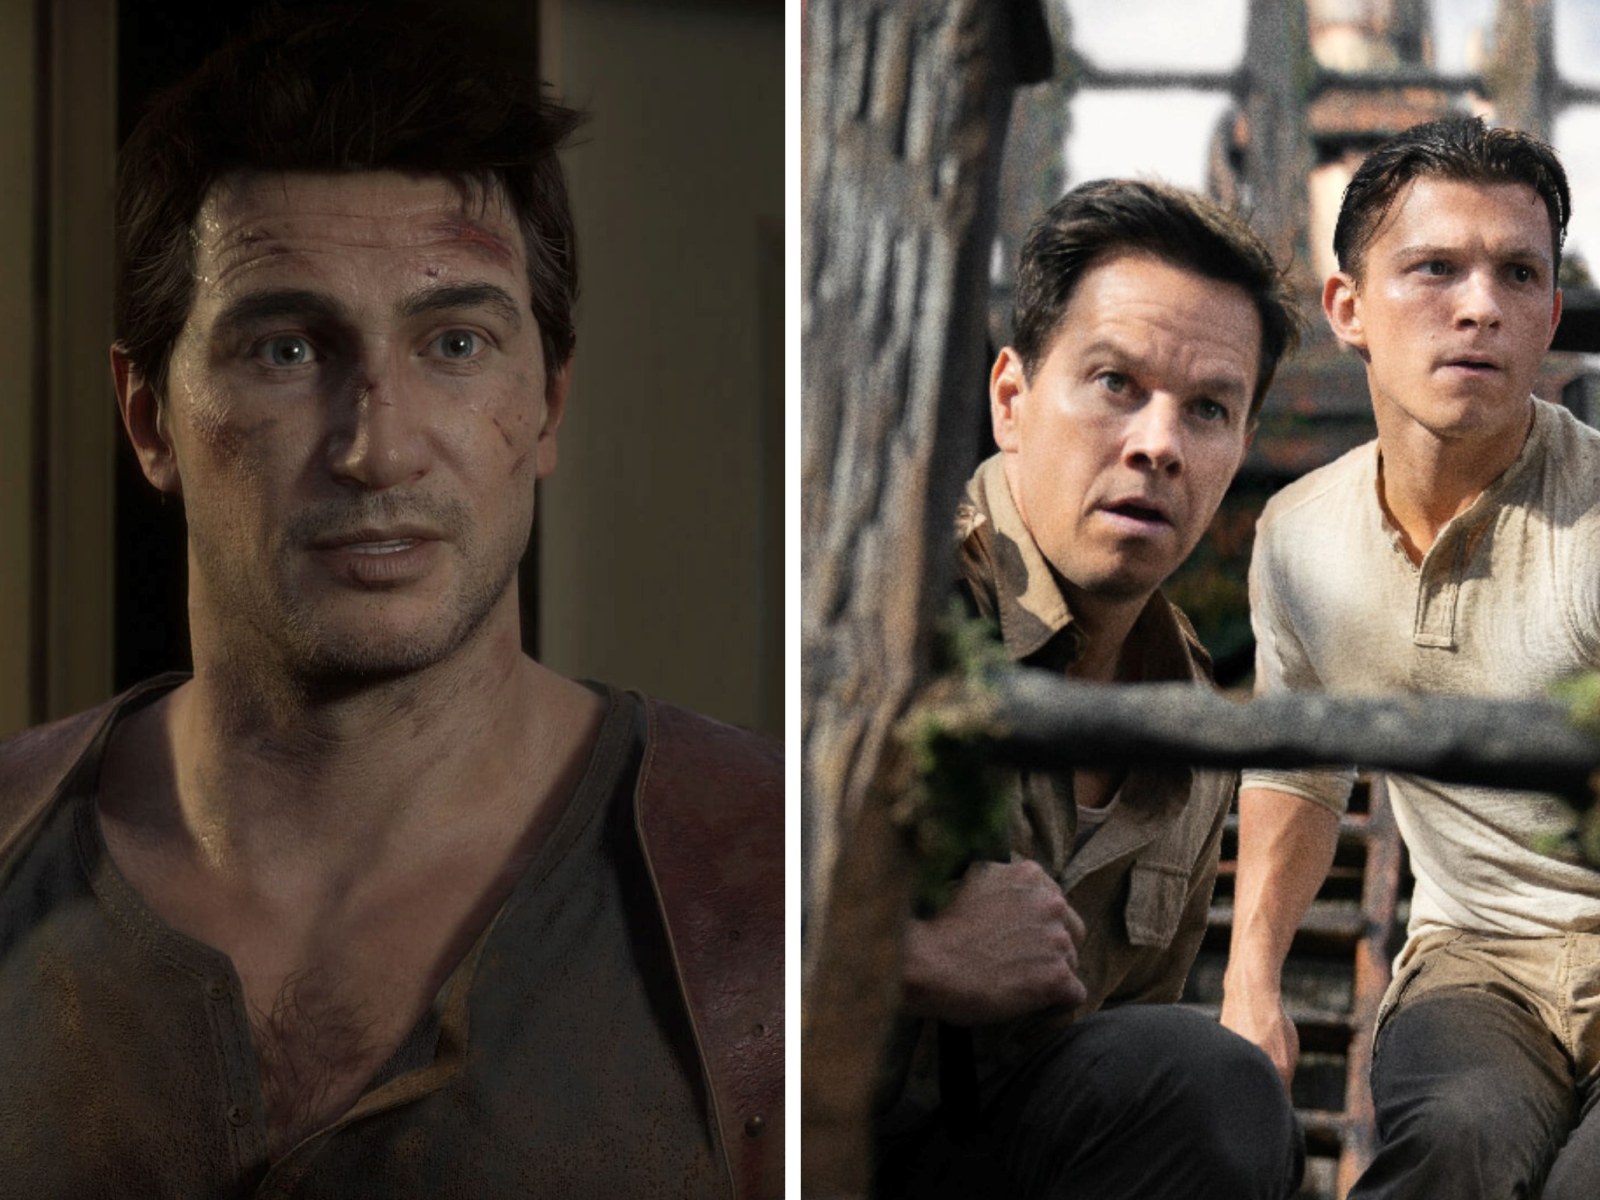 Uncharted: The Movie and casting choices for Nathan Drake by AssassinKID